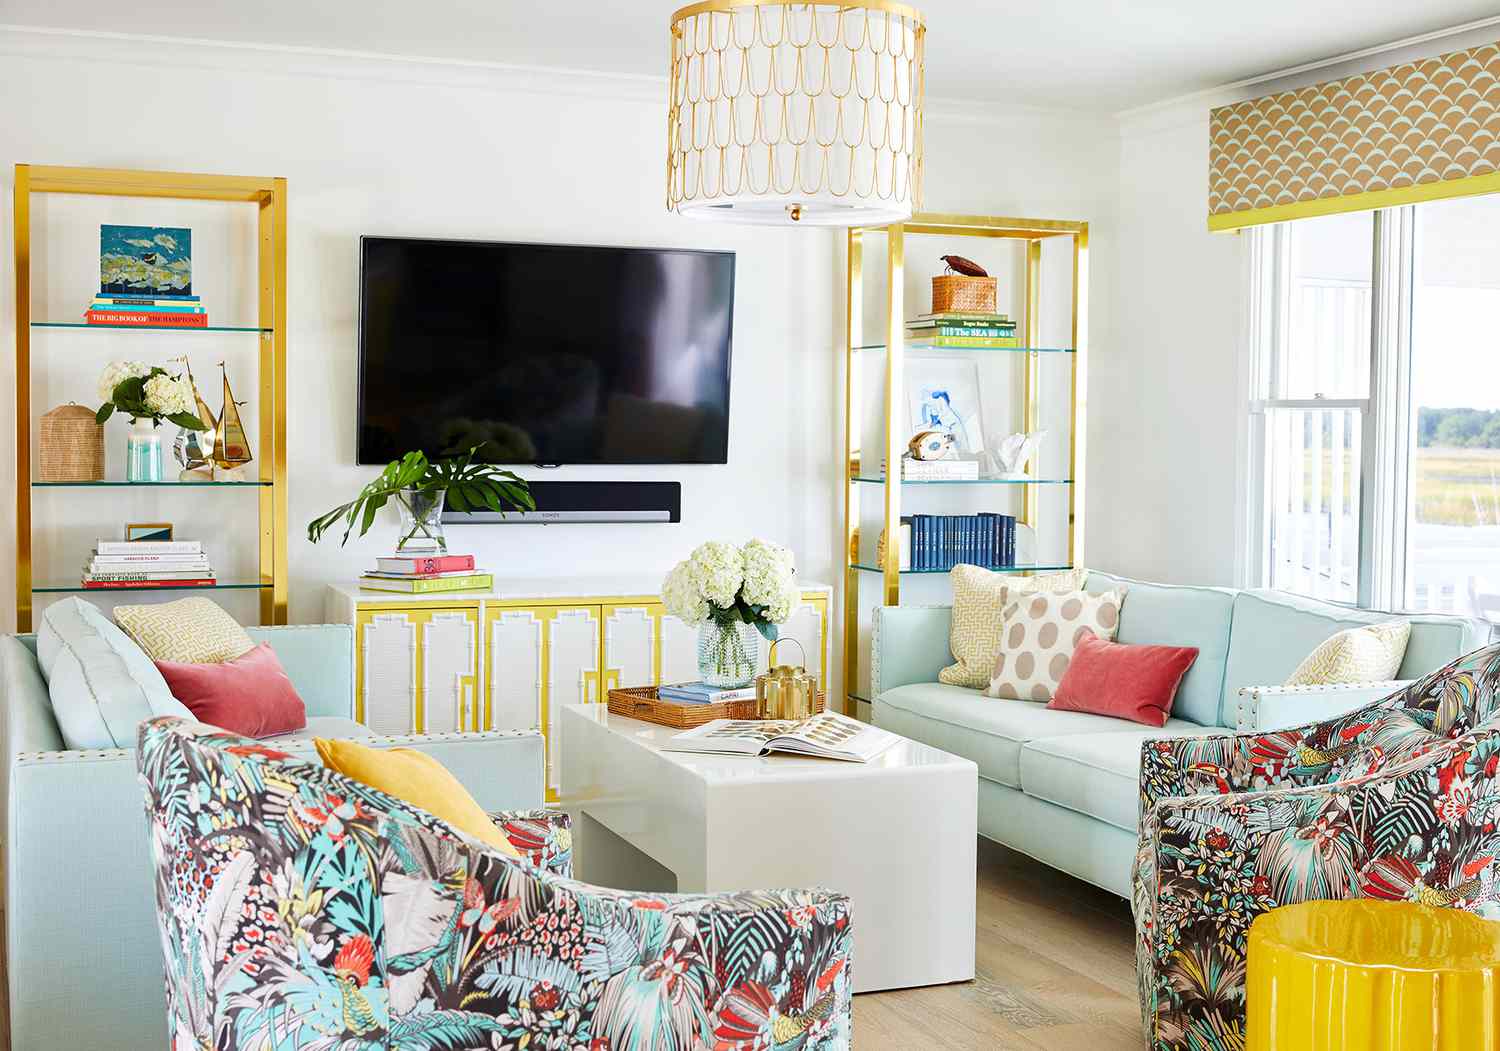 15 Stylish Ways to Decorate with a TV | Better Homes & Gardens